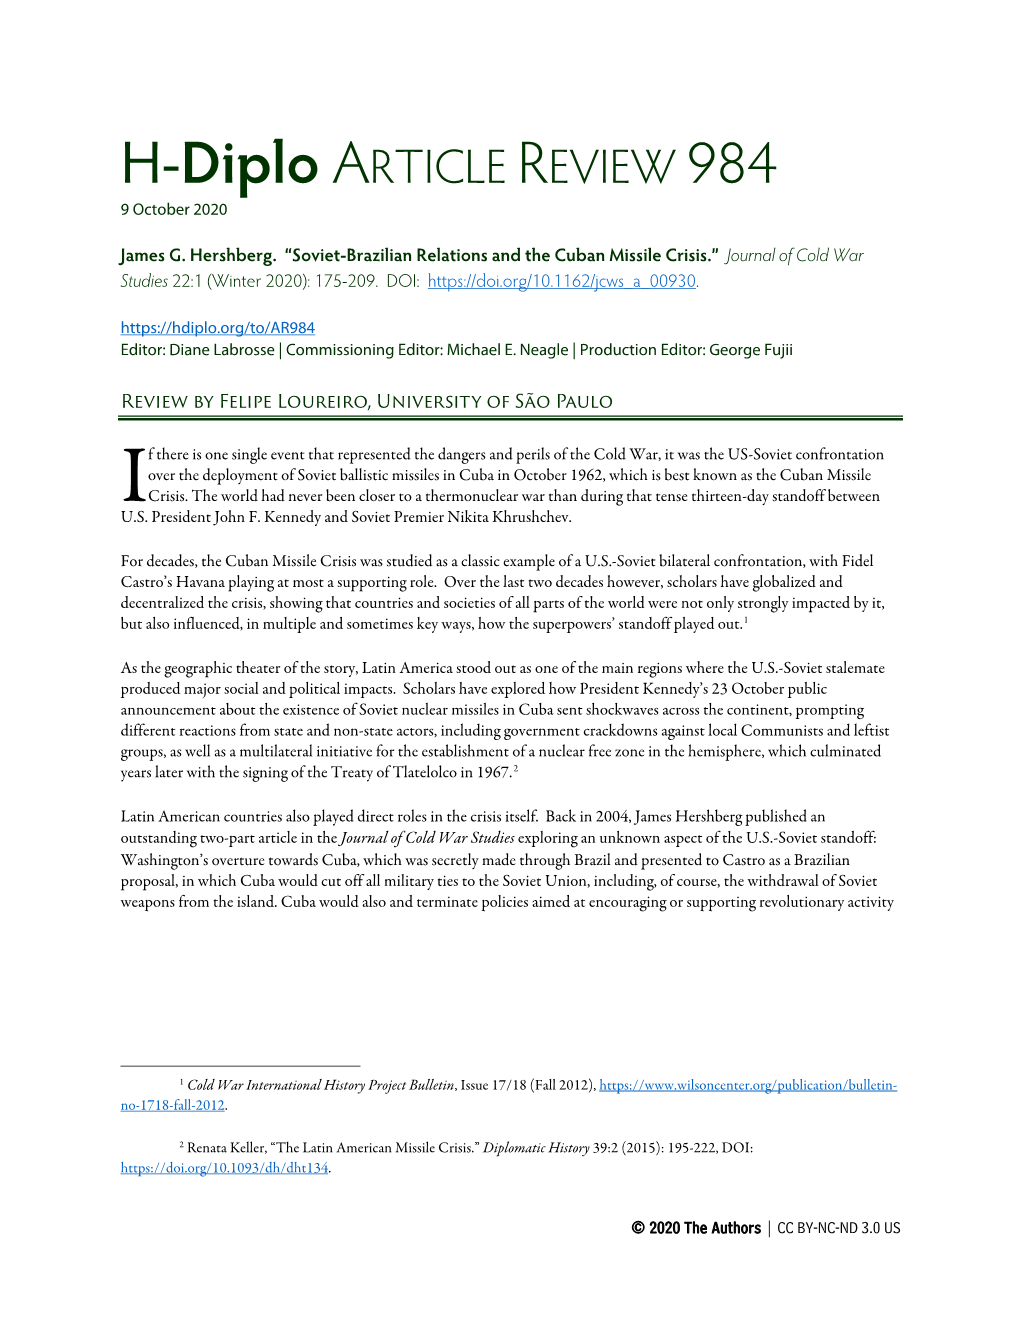 H-Diplo ARTICLE REVIEW 984 9 October 2020